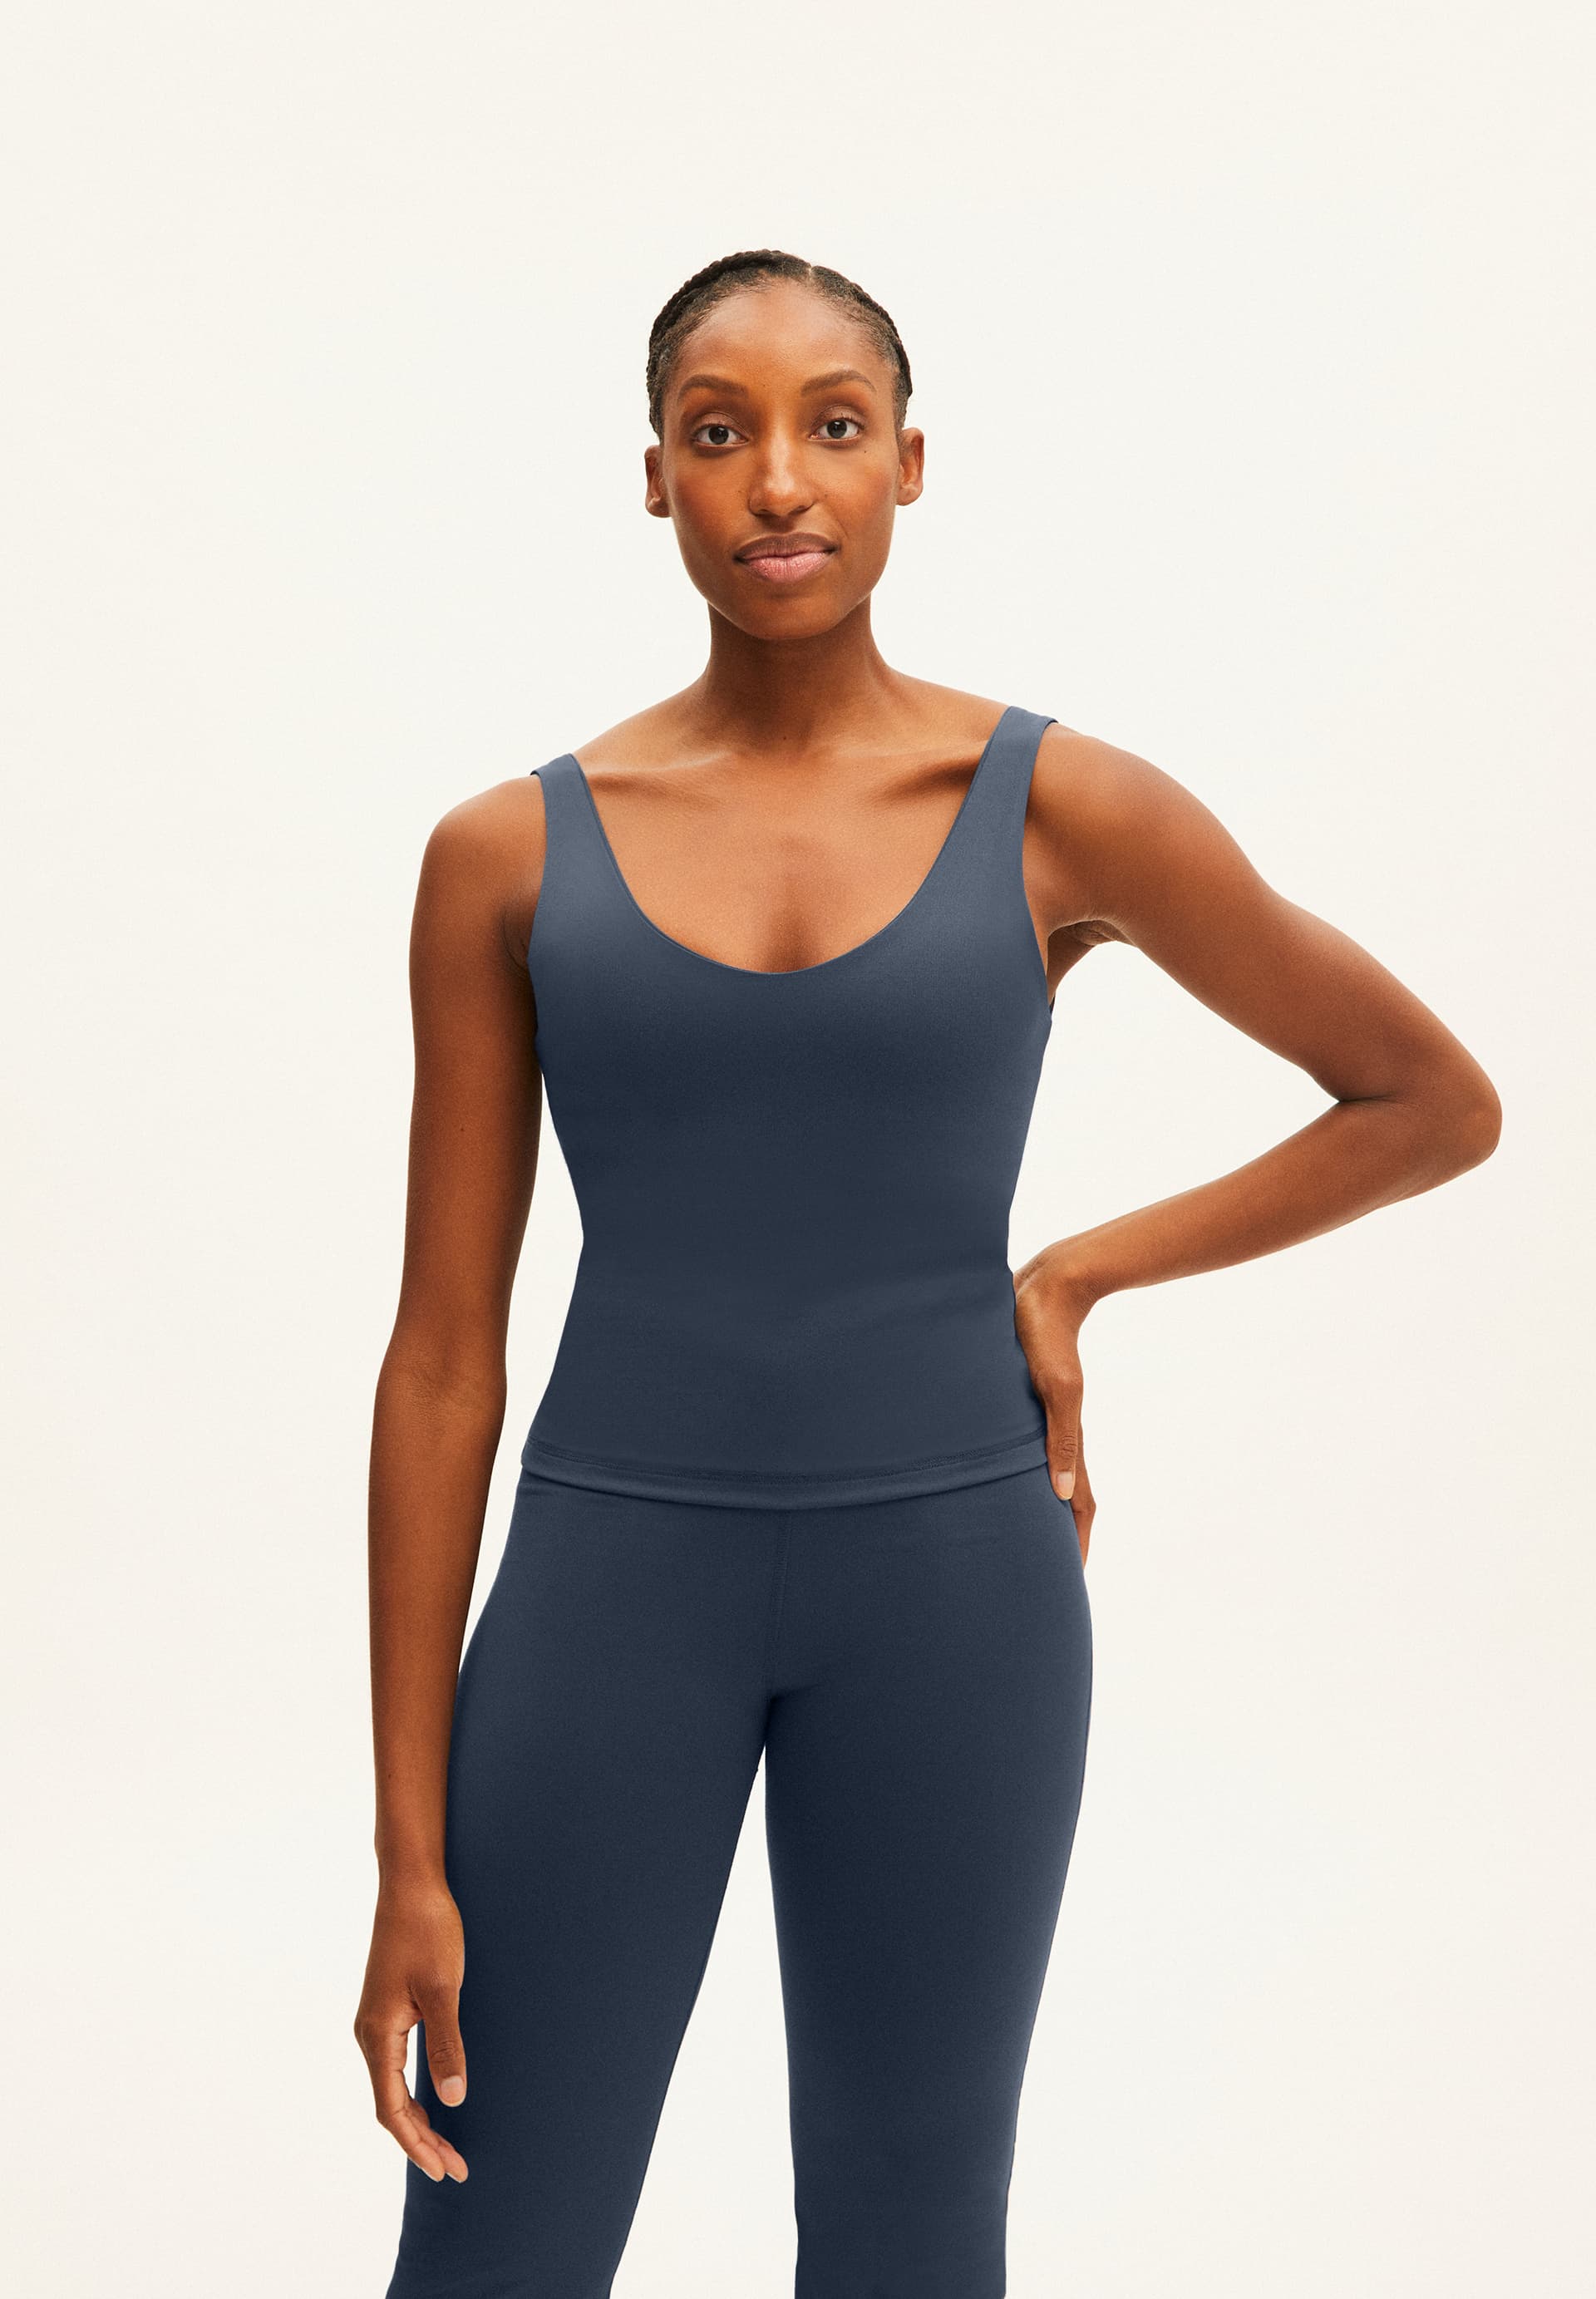 LAALI Activewear Top made of Polyamide Mix (recycled)